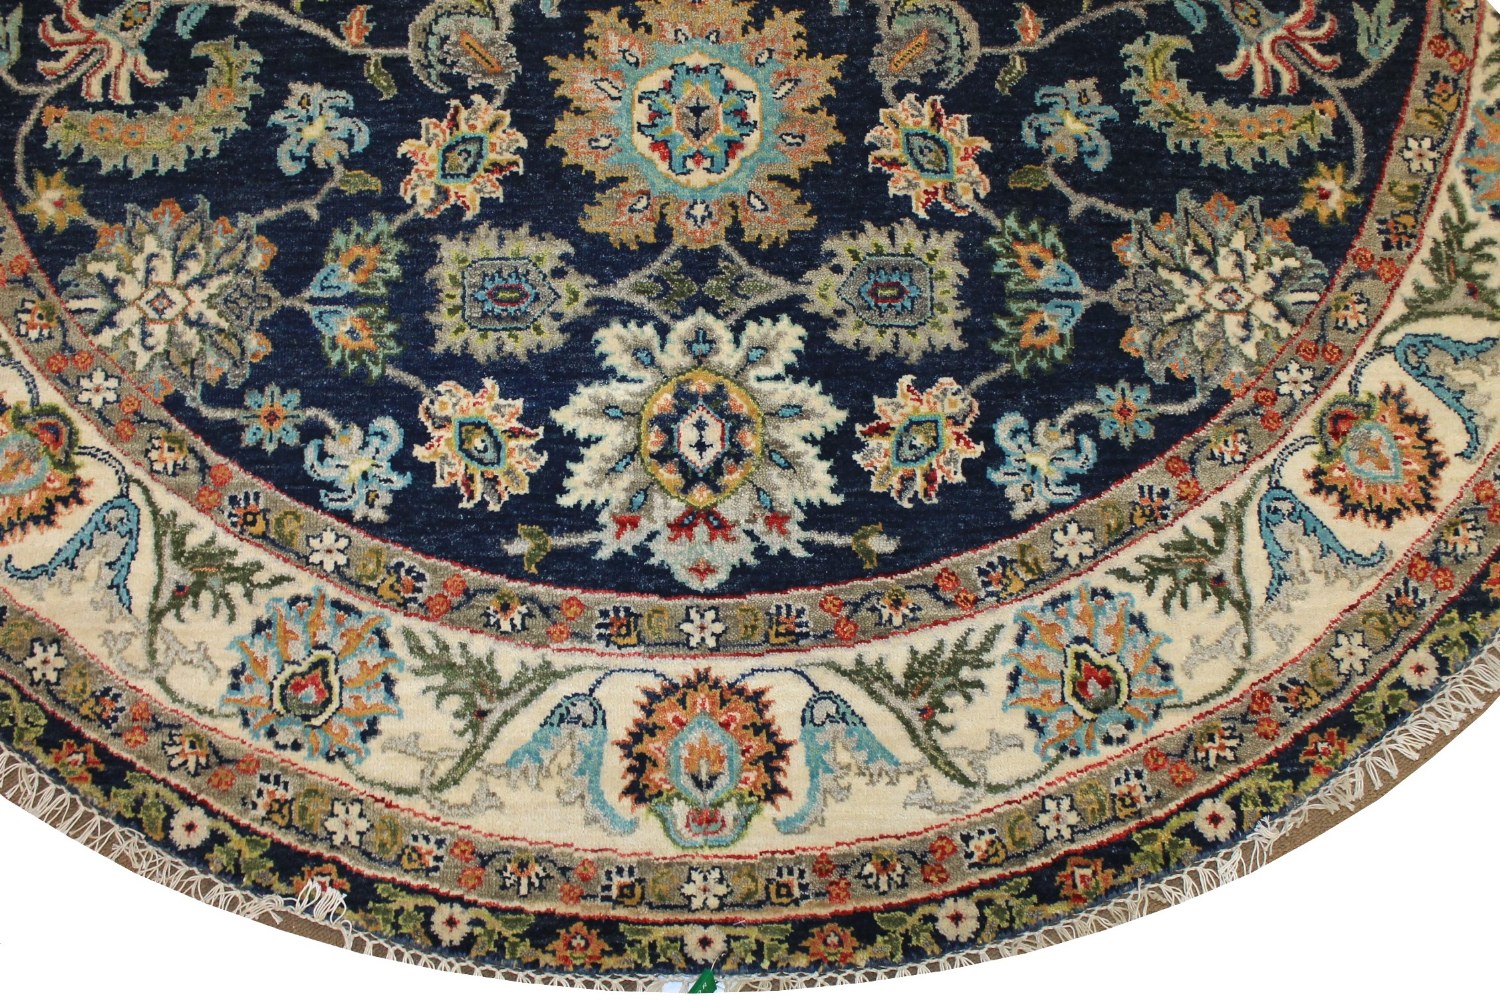 6 ft. - 7 ft. Round & Square Traditional Hand Knotted Wool Area Rug - MR024743